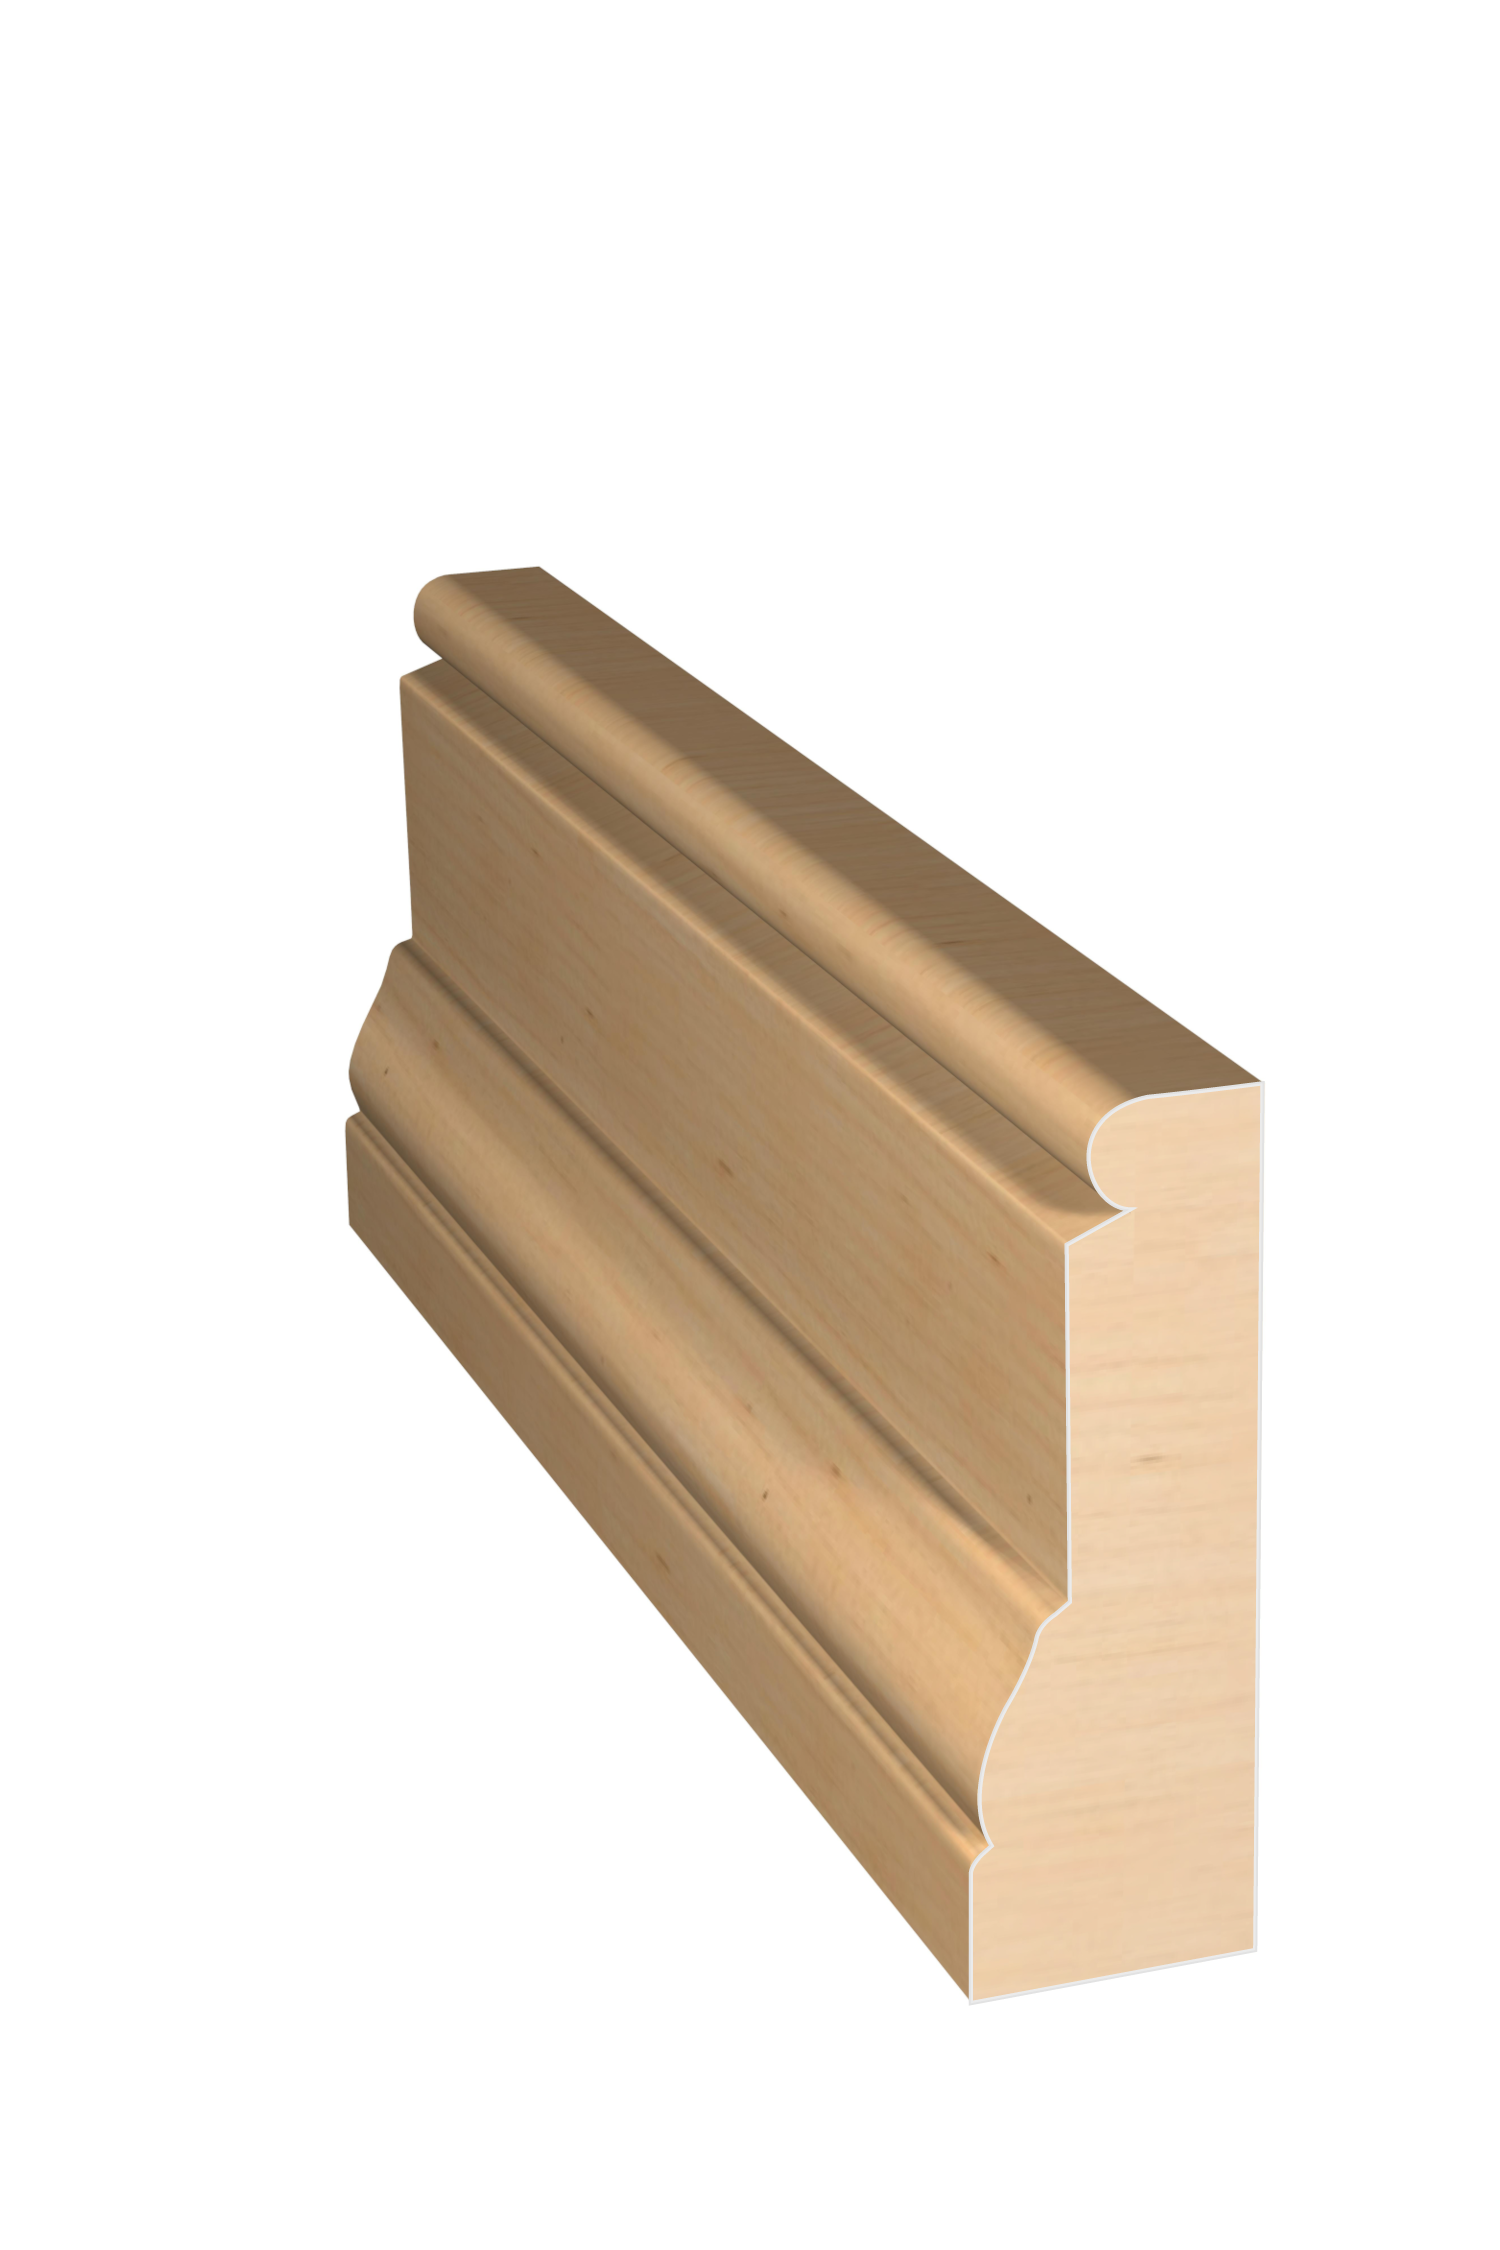 Three dimensional rendering of custom casing wood molding CAPL21419 made by Public Lumber Company in Detroit.